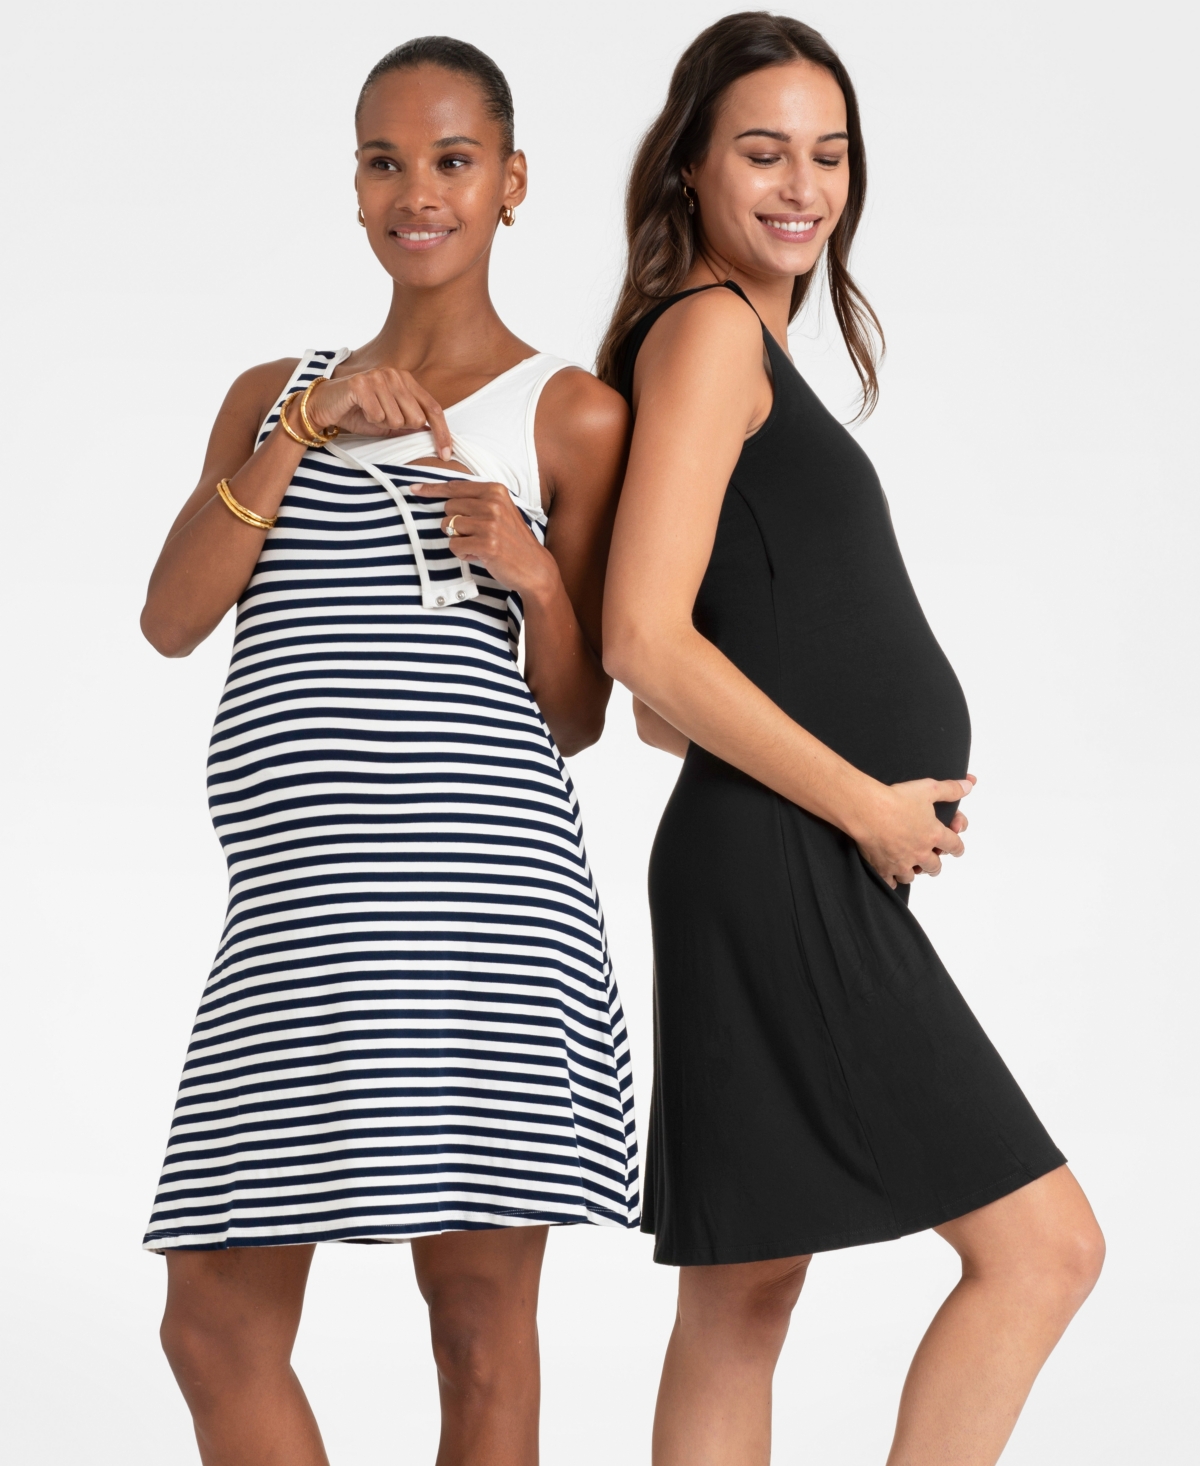 Seraphine Women's Sleeveless Fit And Flare Maternity To Nursing Dresses, Set Of 2 In Black And White